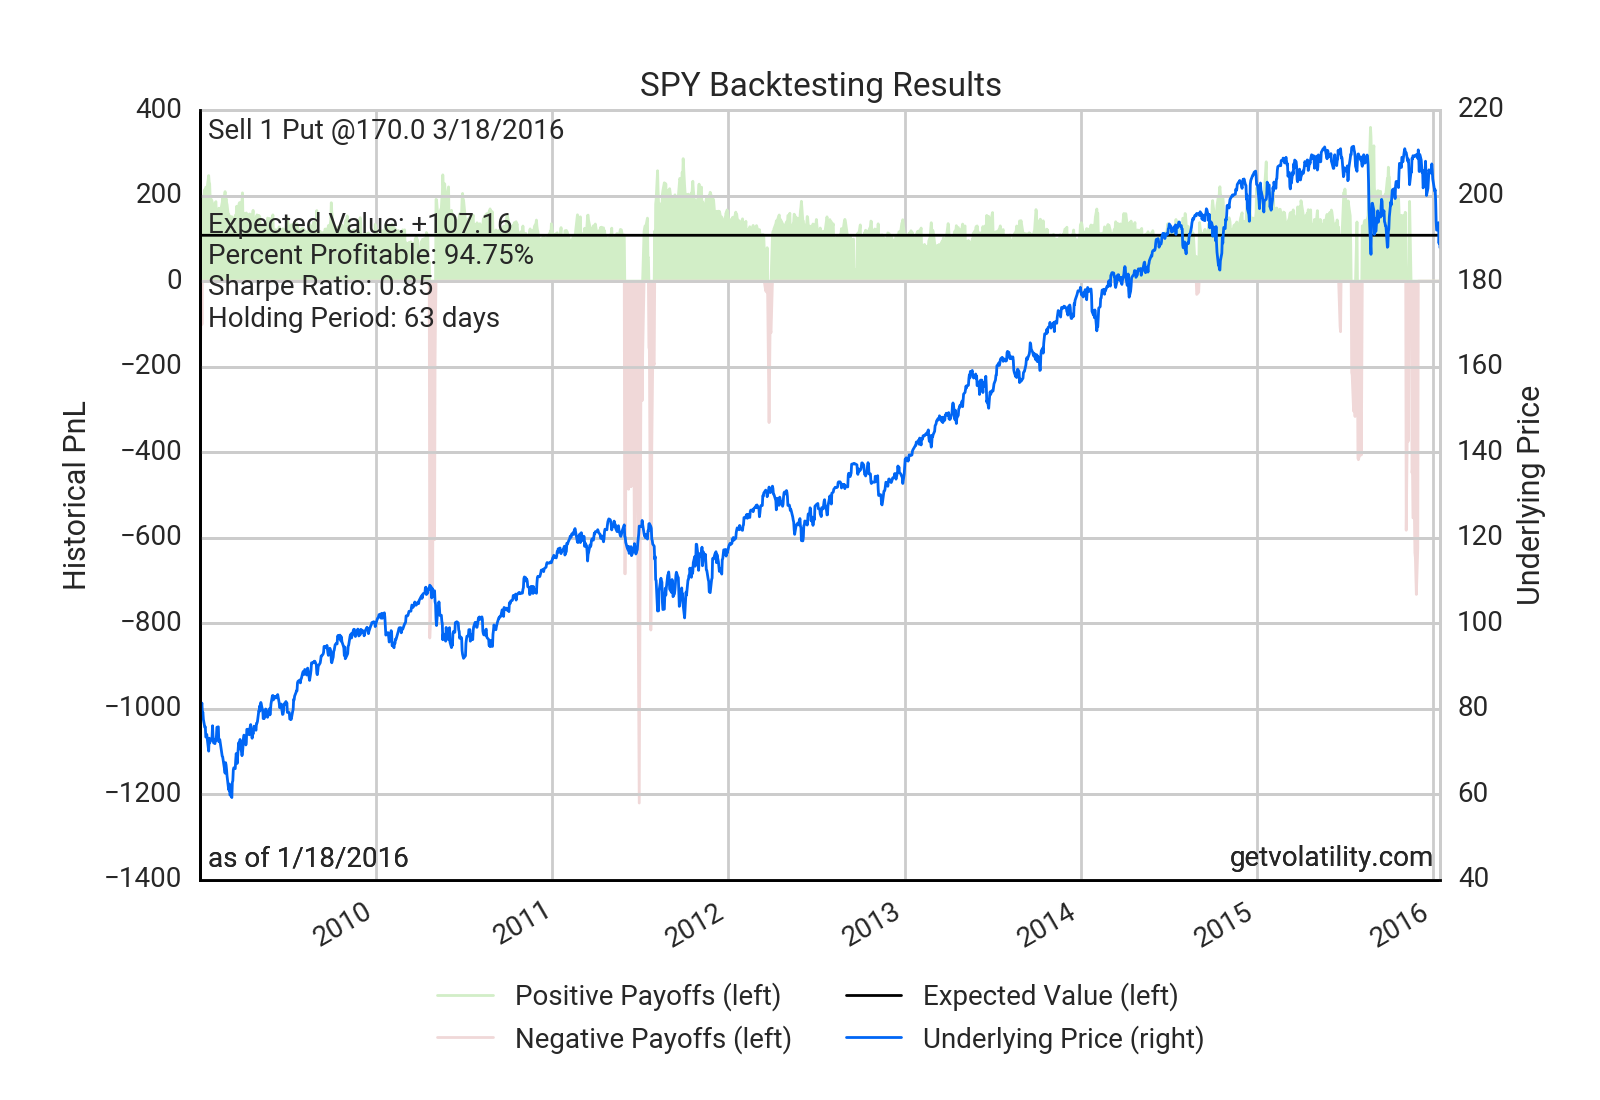 SPY systematic backtest